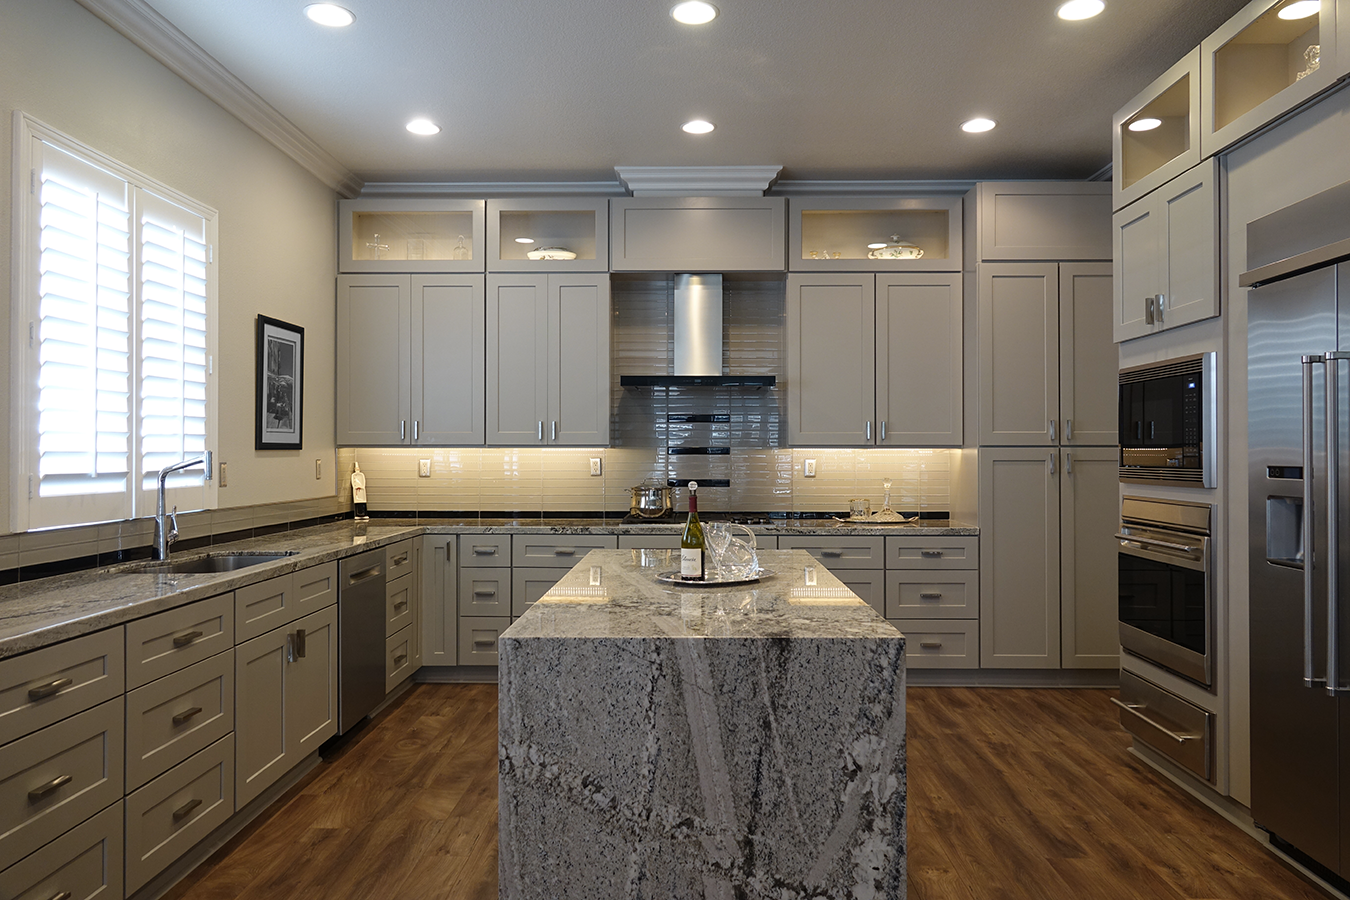 Gray Rta Kitchen Cabinets Online Domain Cabinets